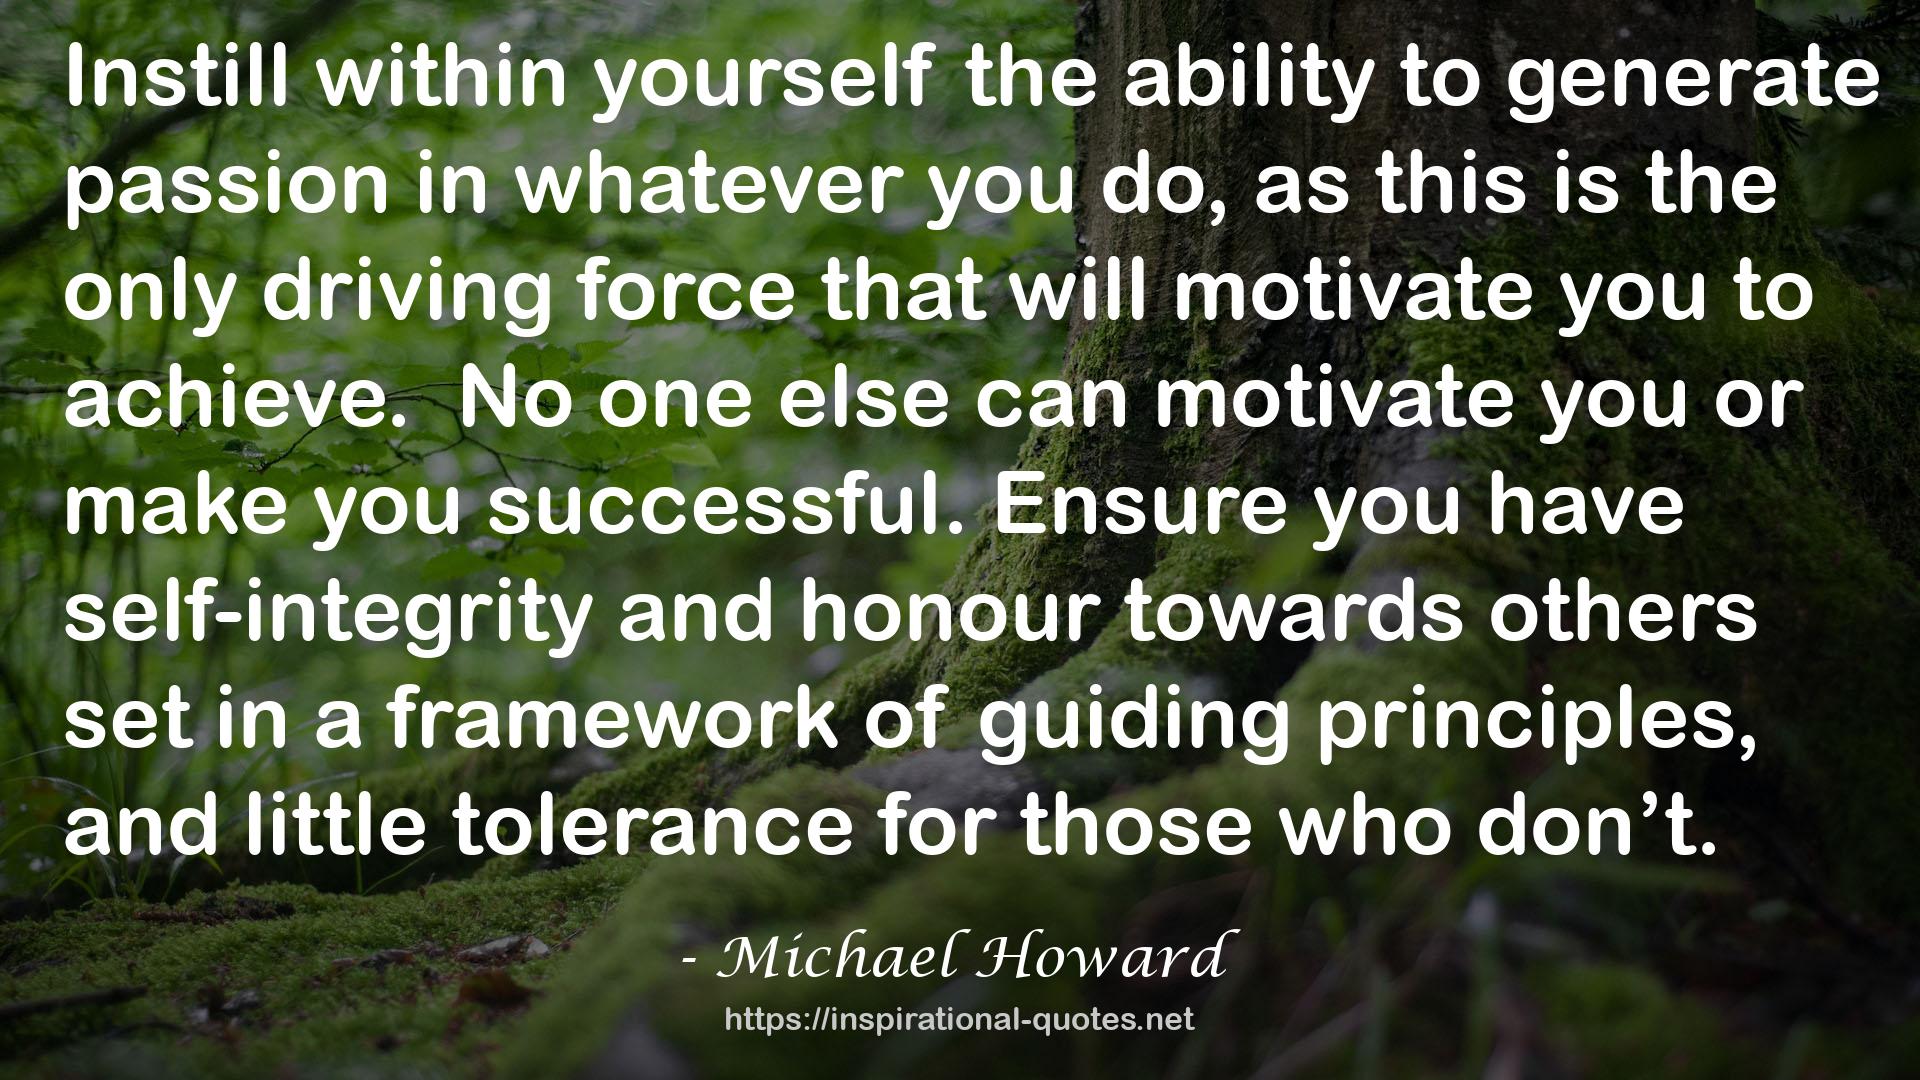 Michael Howard QUOTES